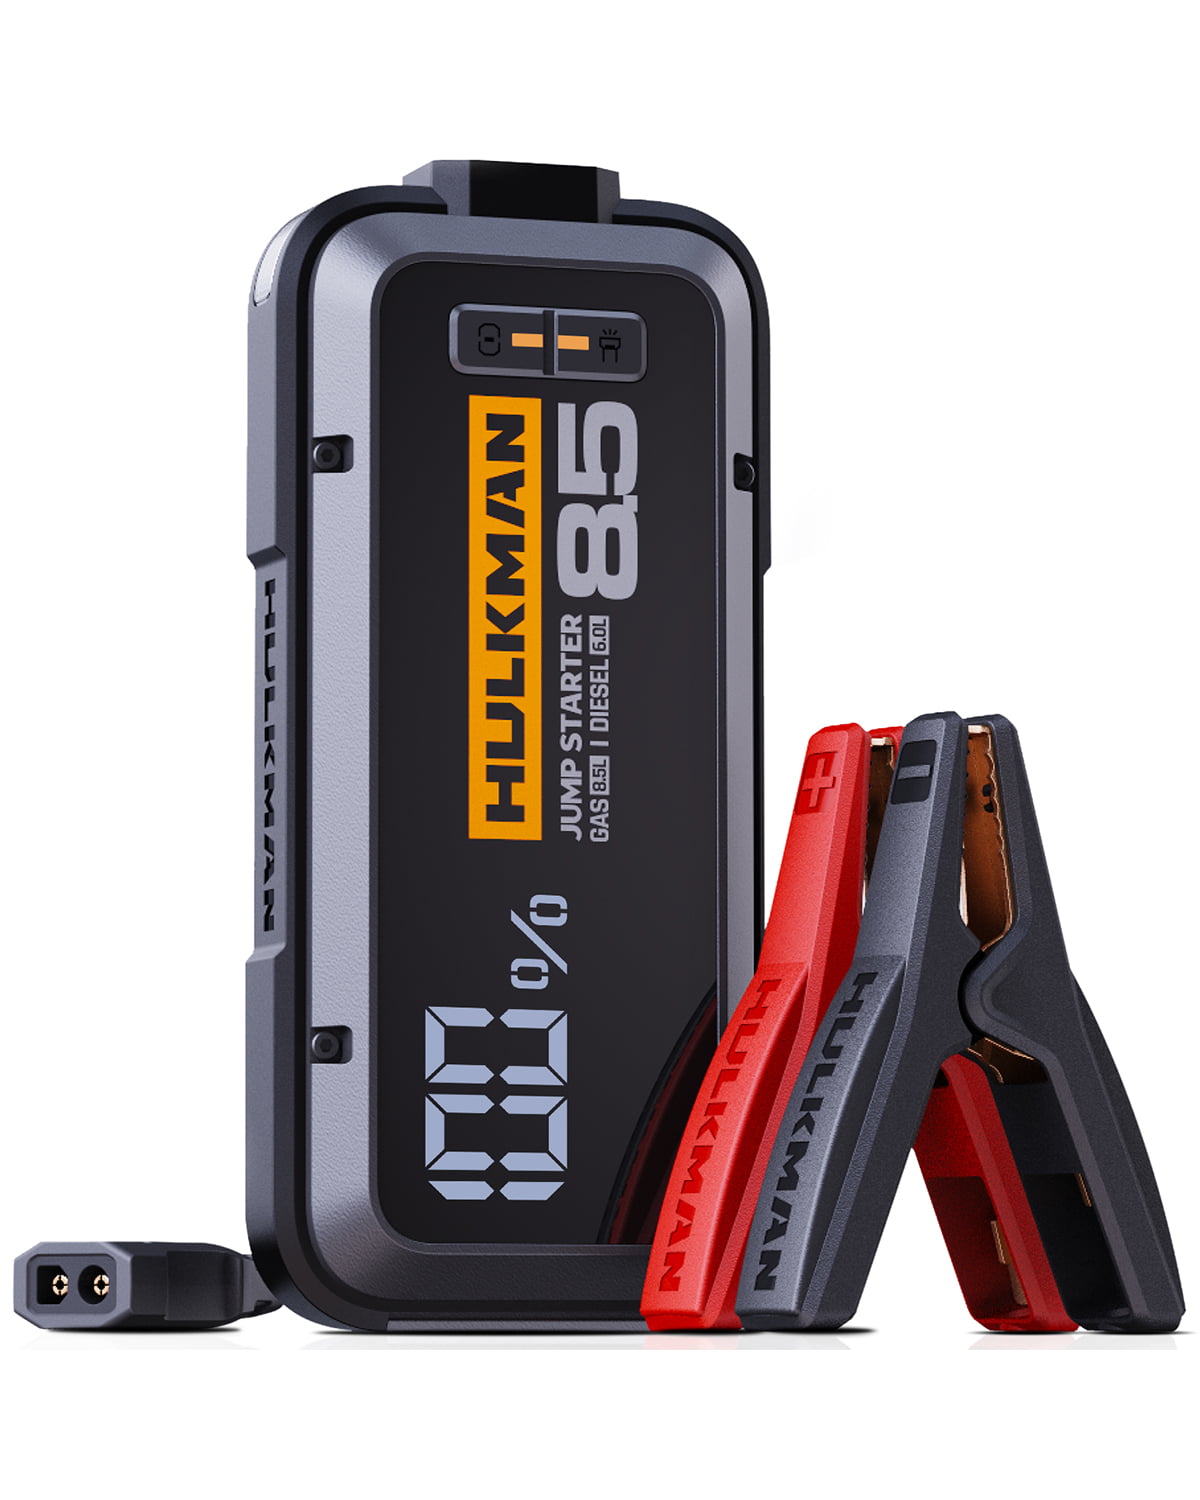 Large Digital LCD Screen 2000A Peak Current Portable Battery Jump Starter for up to 7.0L Gas & 3.0L Diesel Engines Power Bank Charger and Jumper Cables AstroAI Car Jump Starter 18000mAh 